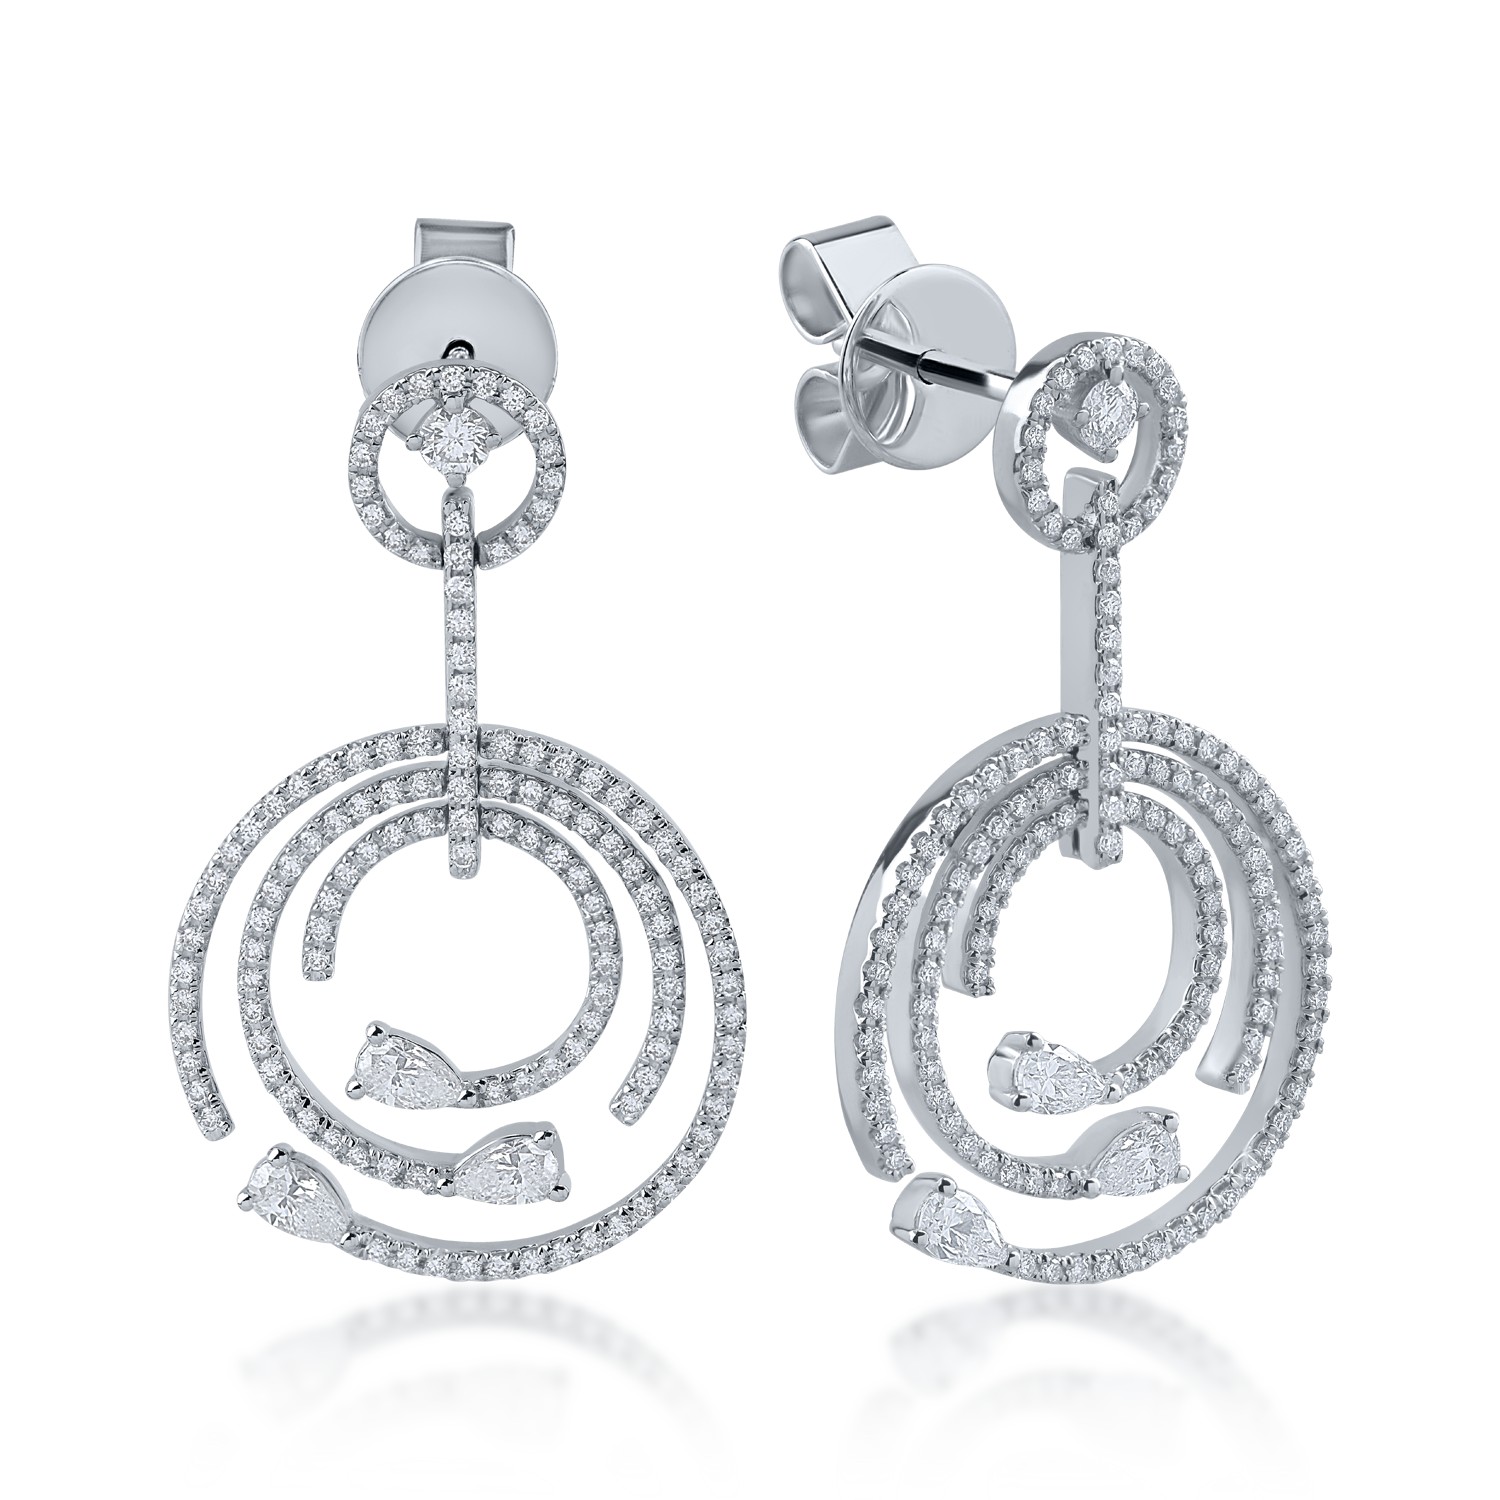 White gold earrings with 1.35ct diamonds